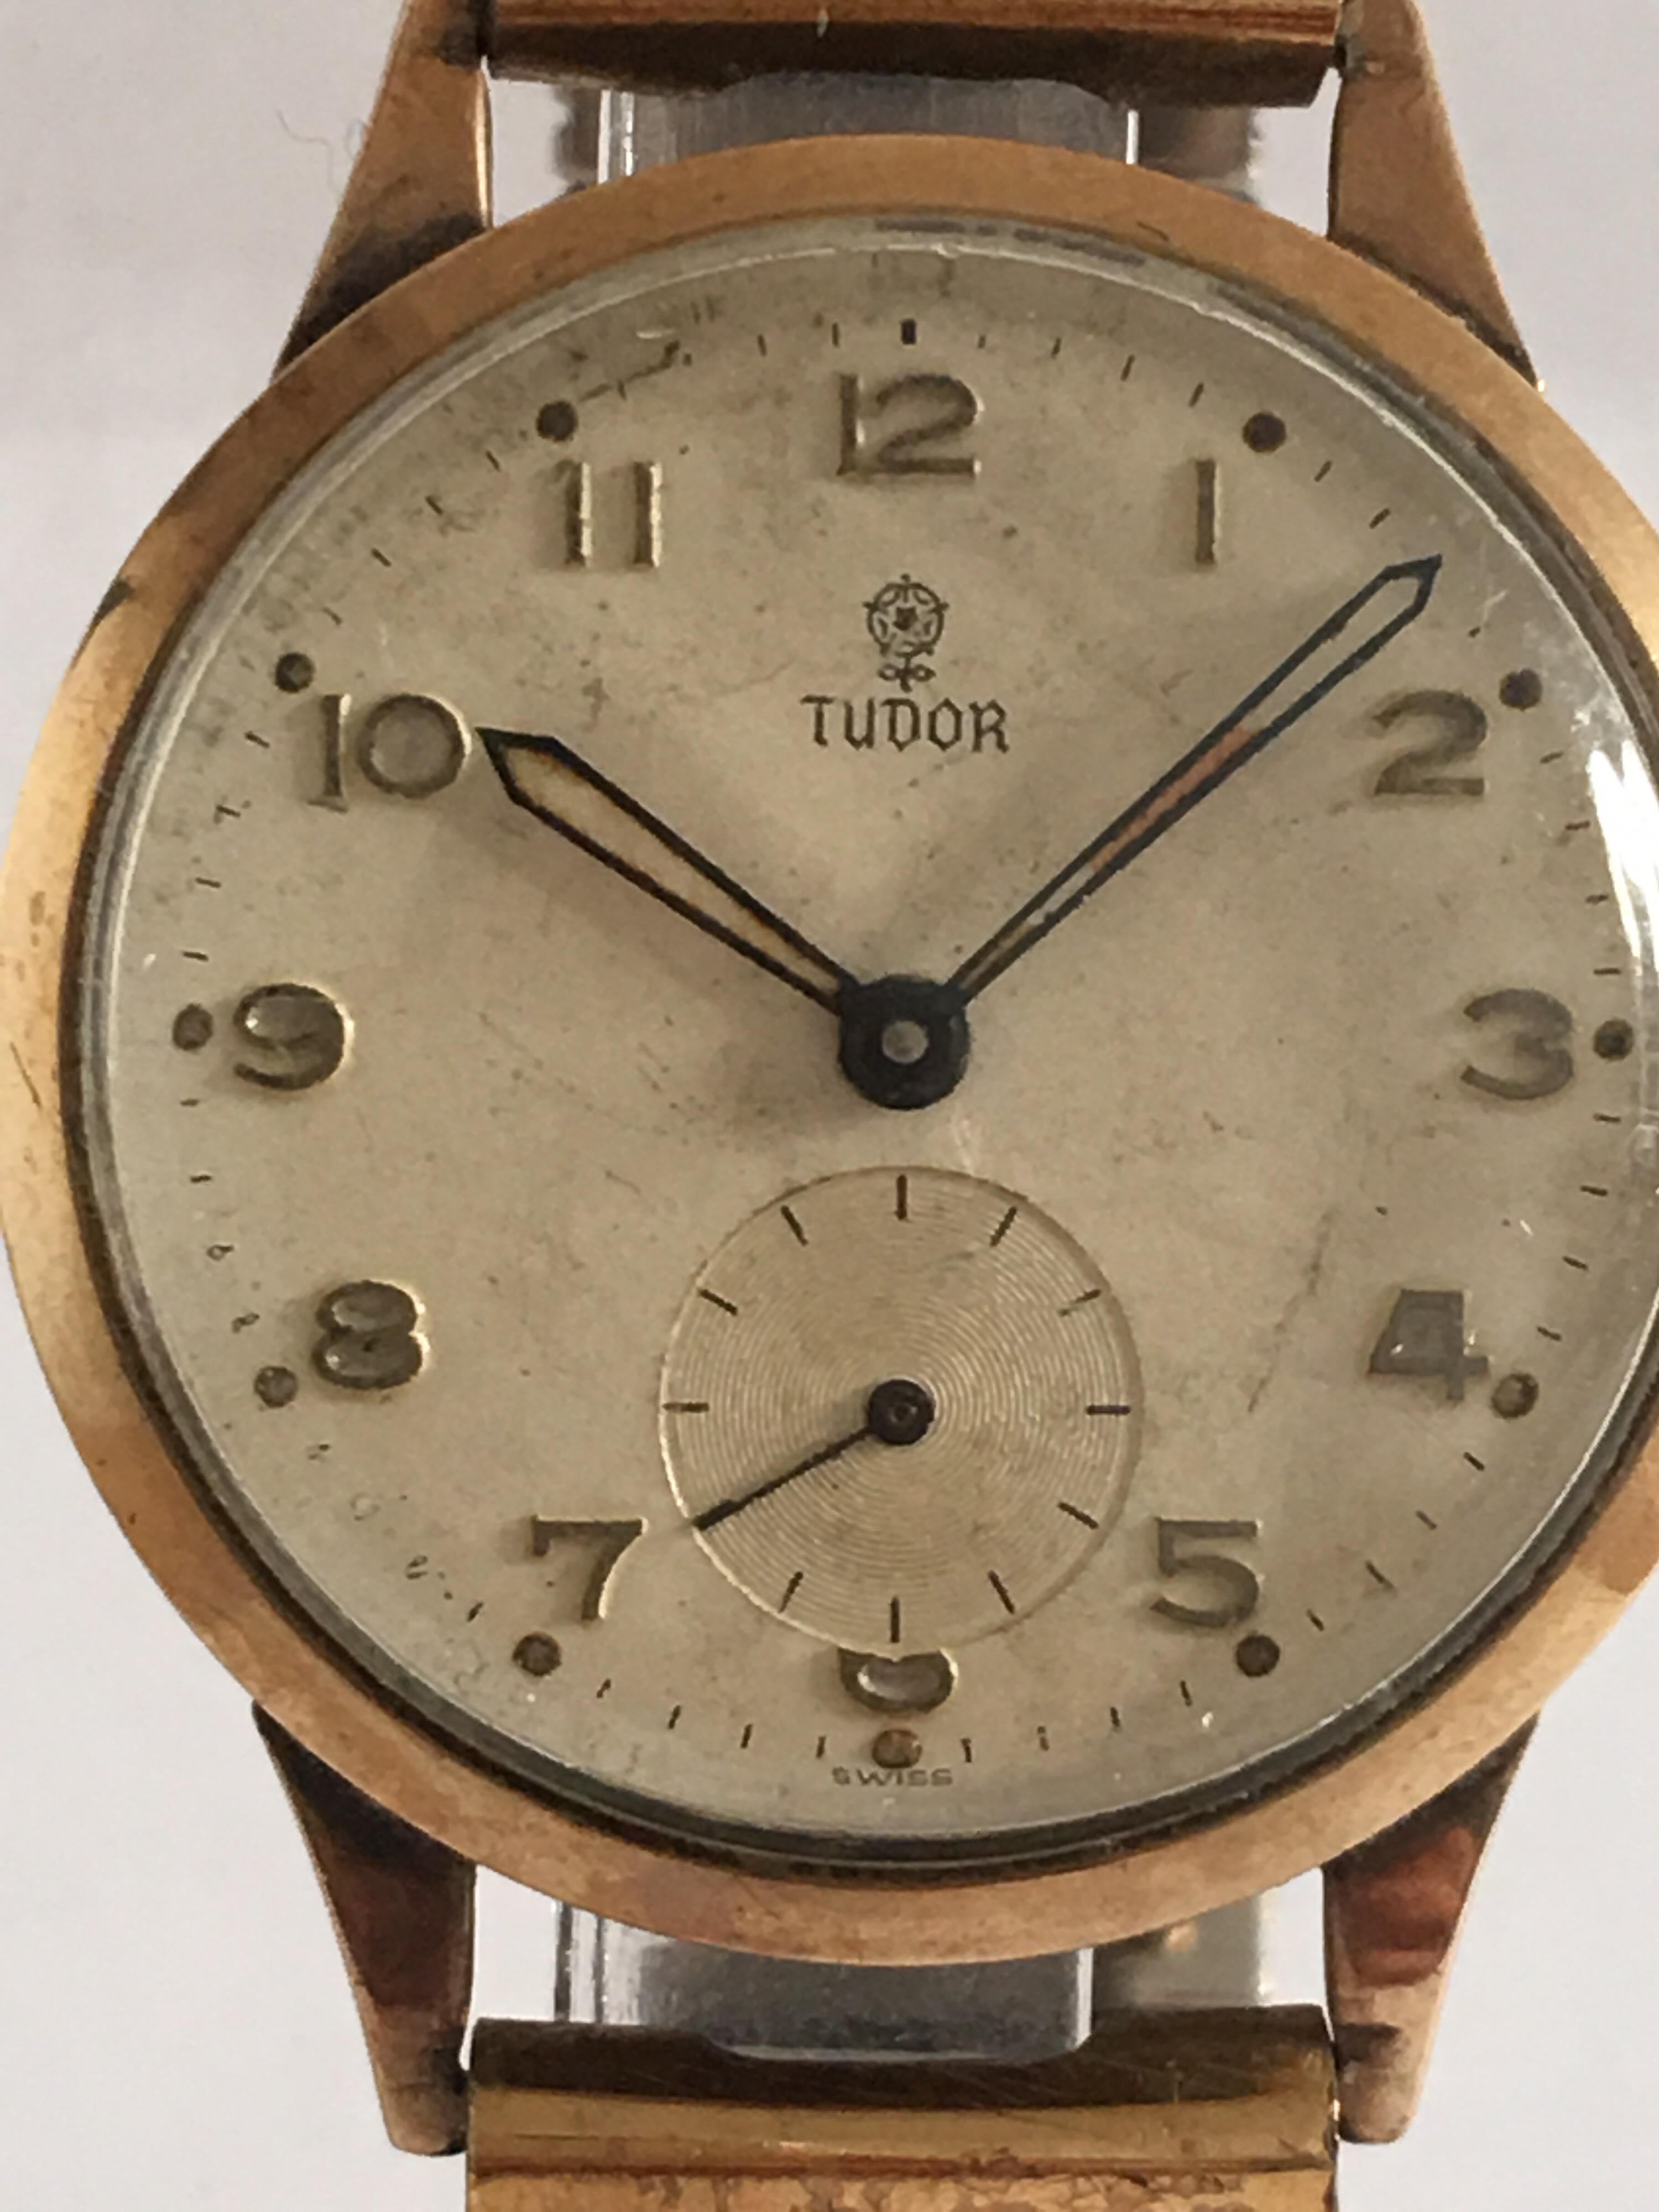 This Pre-owned Good Quality Vintage watch is in Good Working condition and is ticking well. With its Flexible Rolled Gold & inner stainless steel Band. There is a bit of aged on the dial as shown. Tiny scratches on the glass.
Please study the images